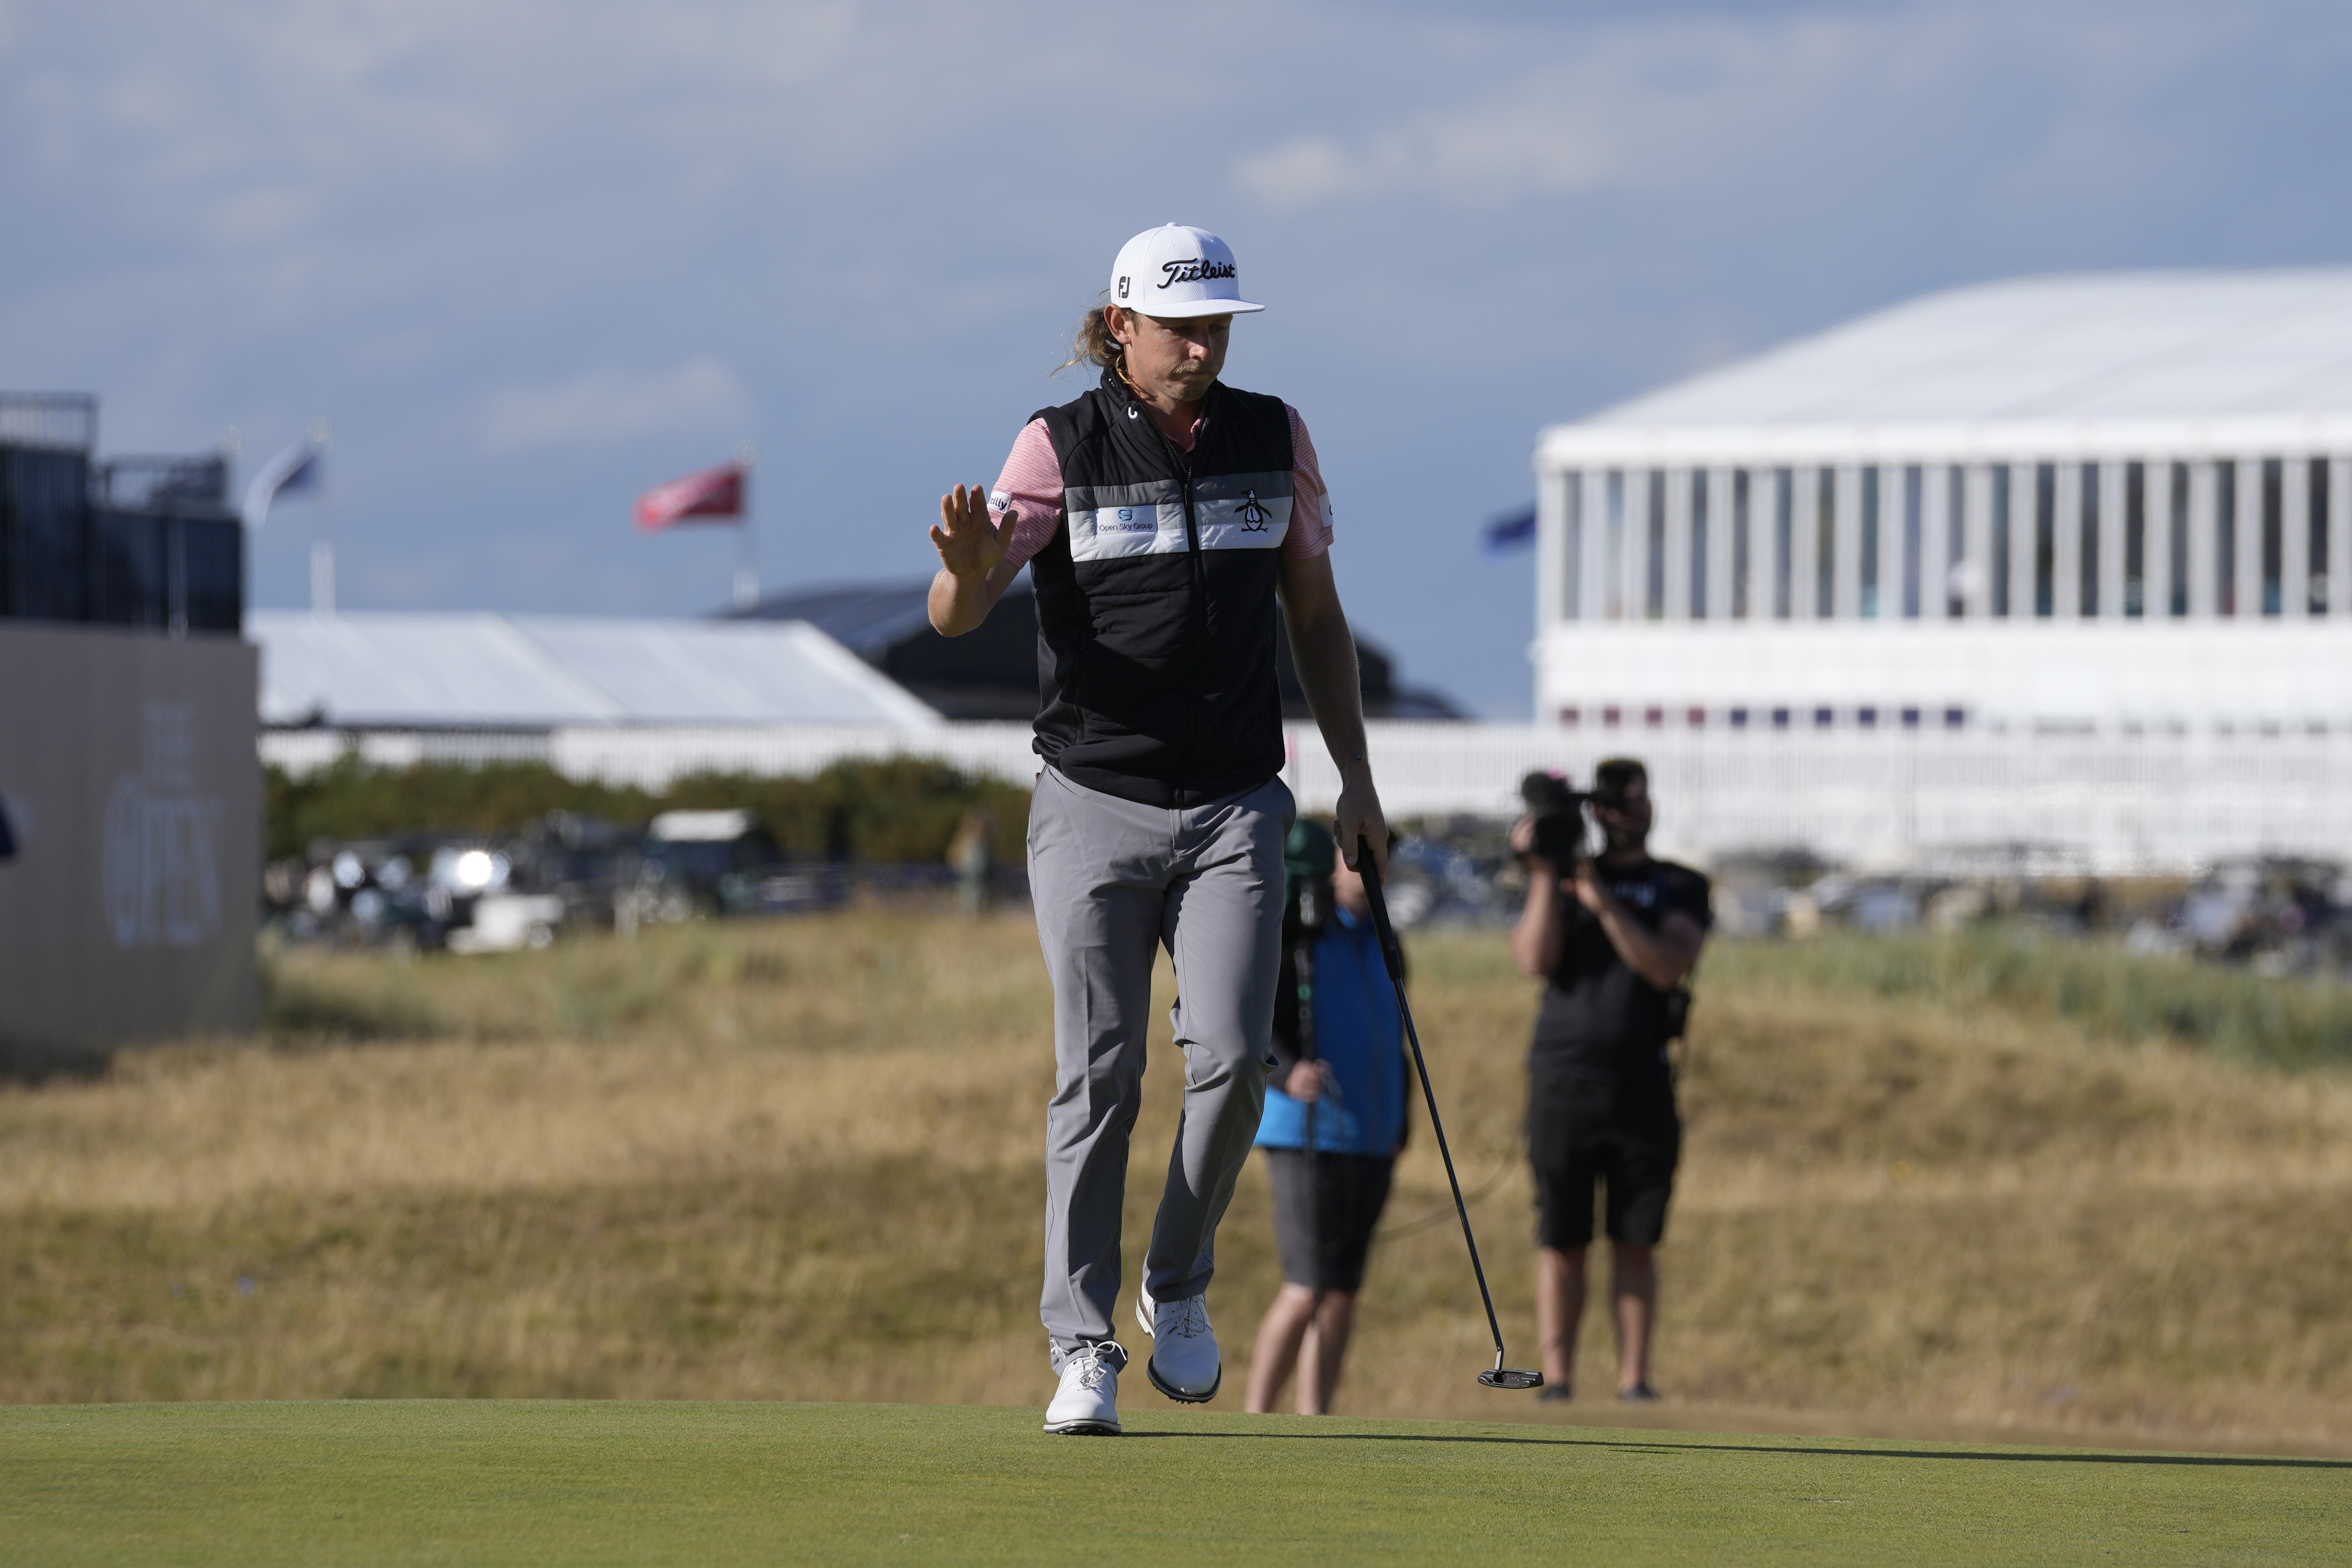 British Open 2022 Round 3 free live stream How to watch, tee times Cameron Smith, Cameron Young, Rory McIlroy